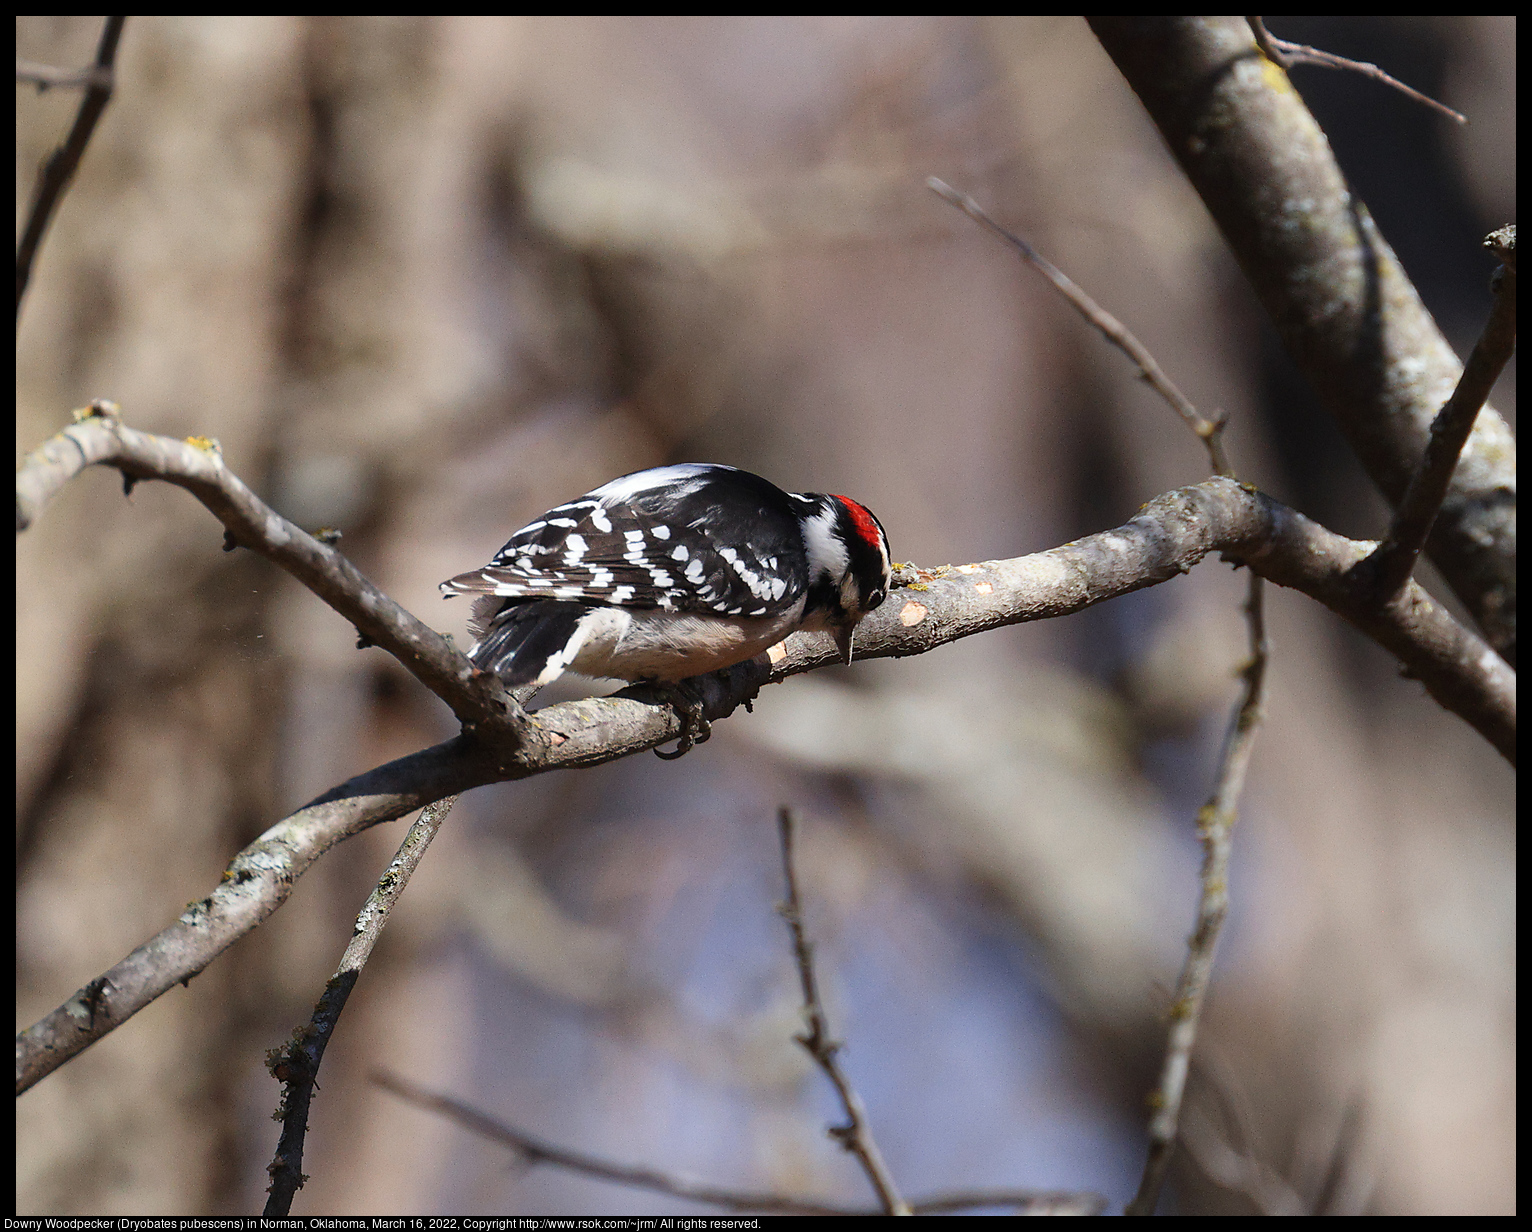 Downy Woodpecker (Dryobates pubescens) in Norman, Oklahoma, March 16, 2022